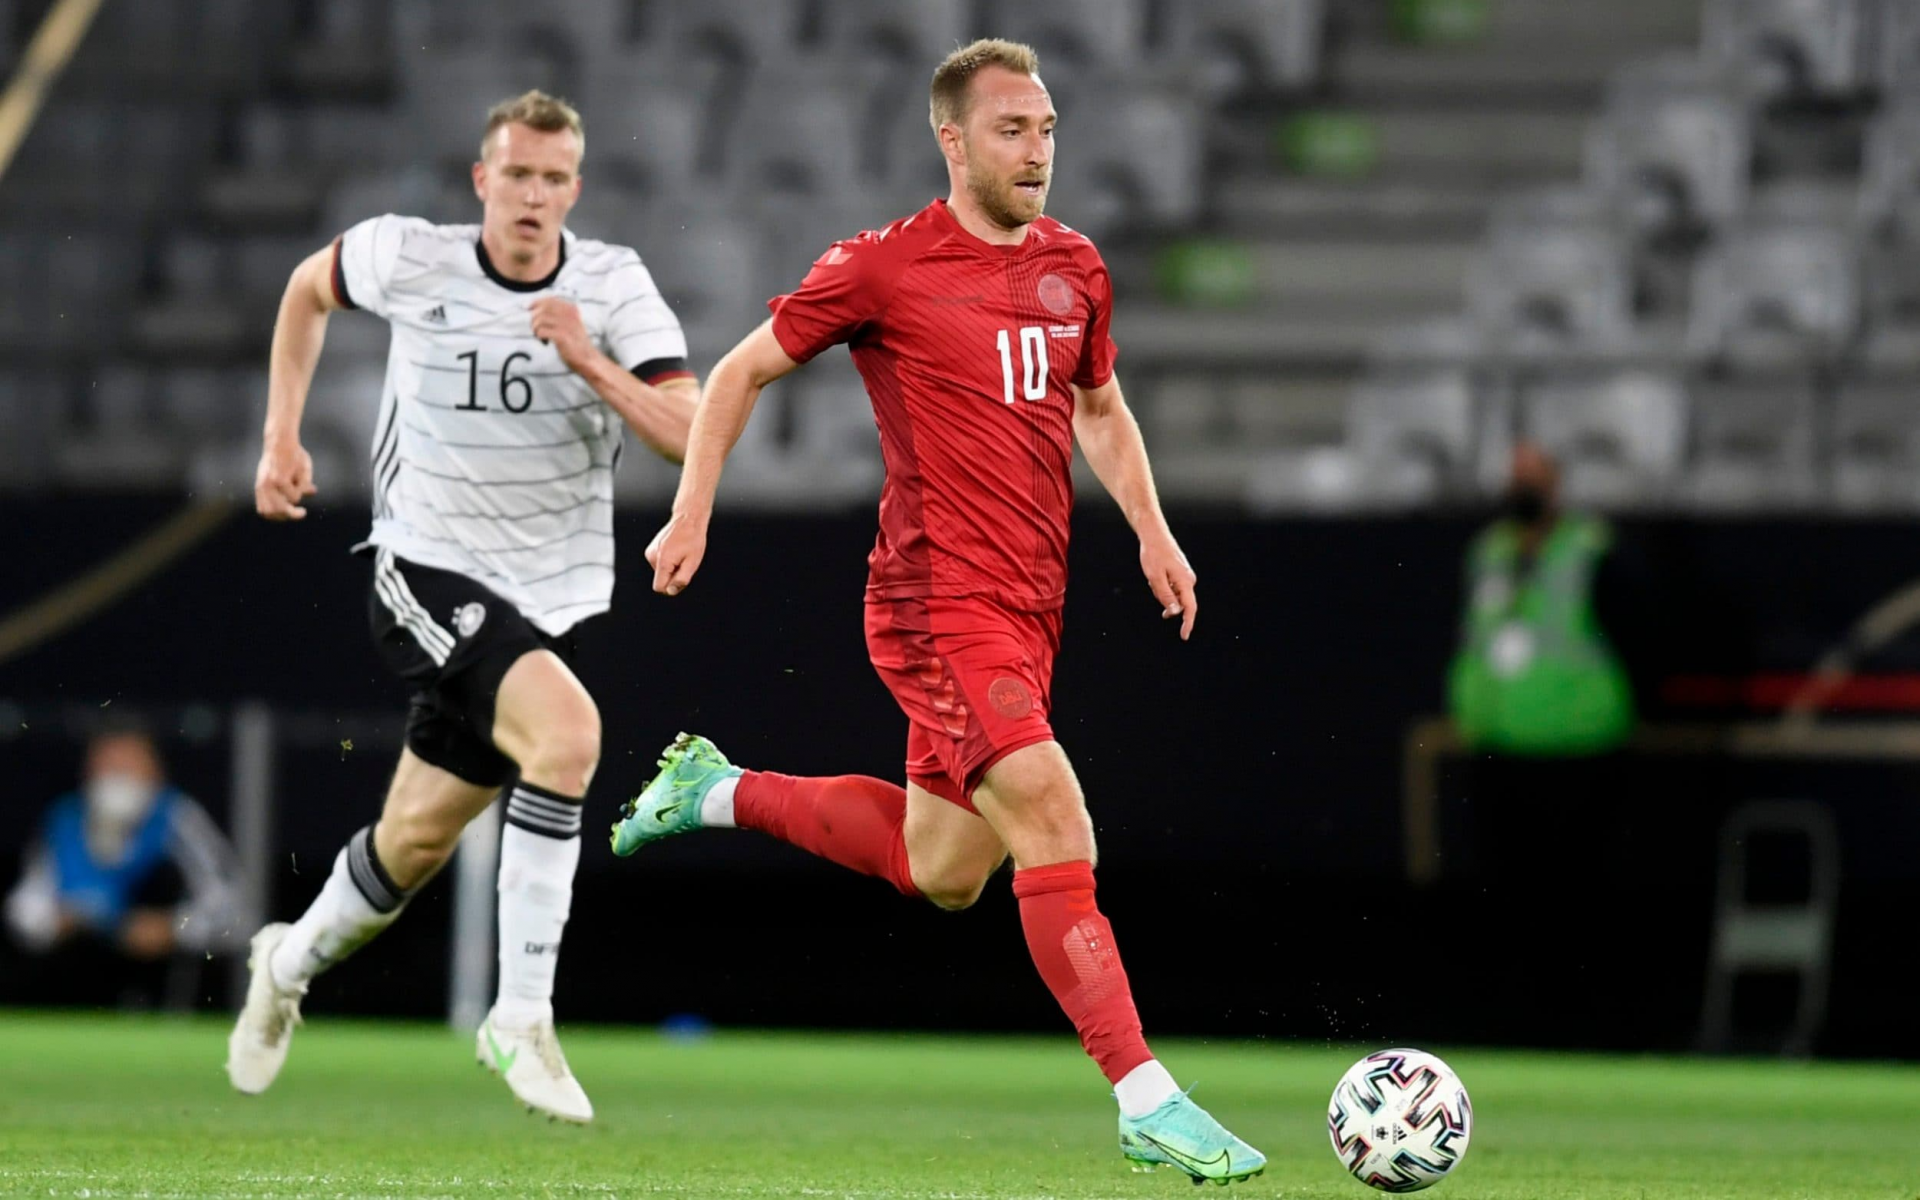 Denmark vs Finland Euro 2020: What for Free, Kick off time, TV channels, Live stream, Team news